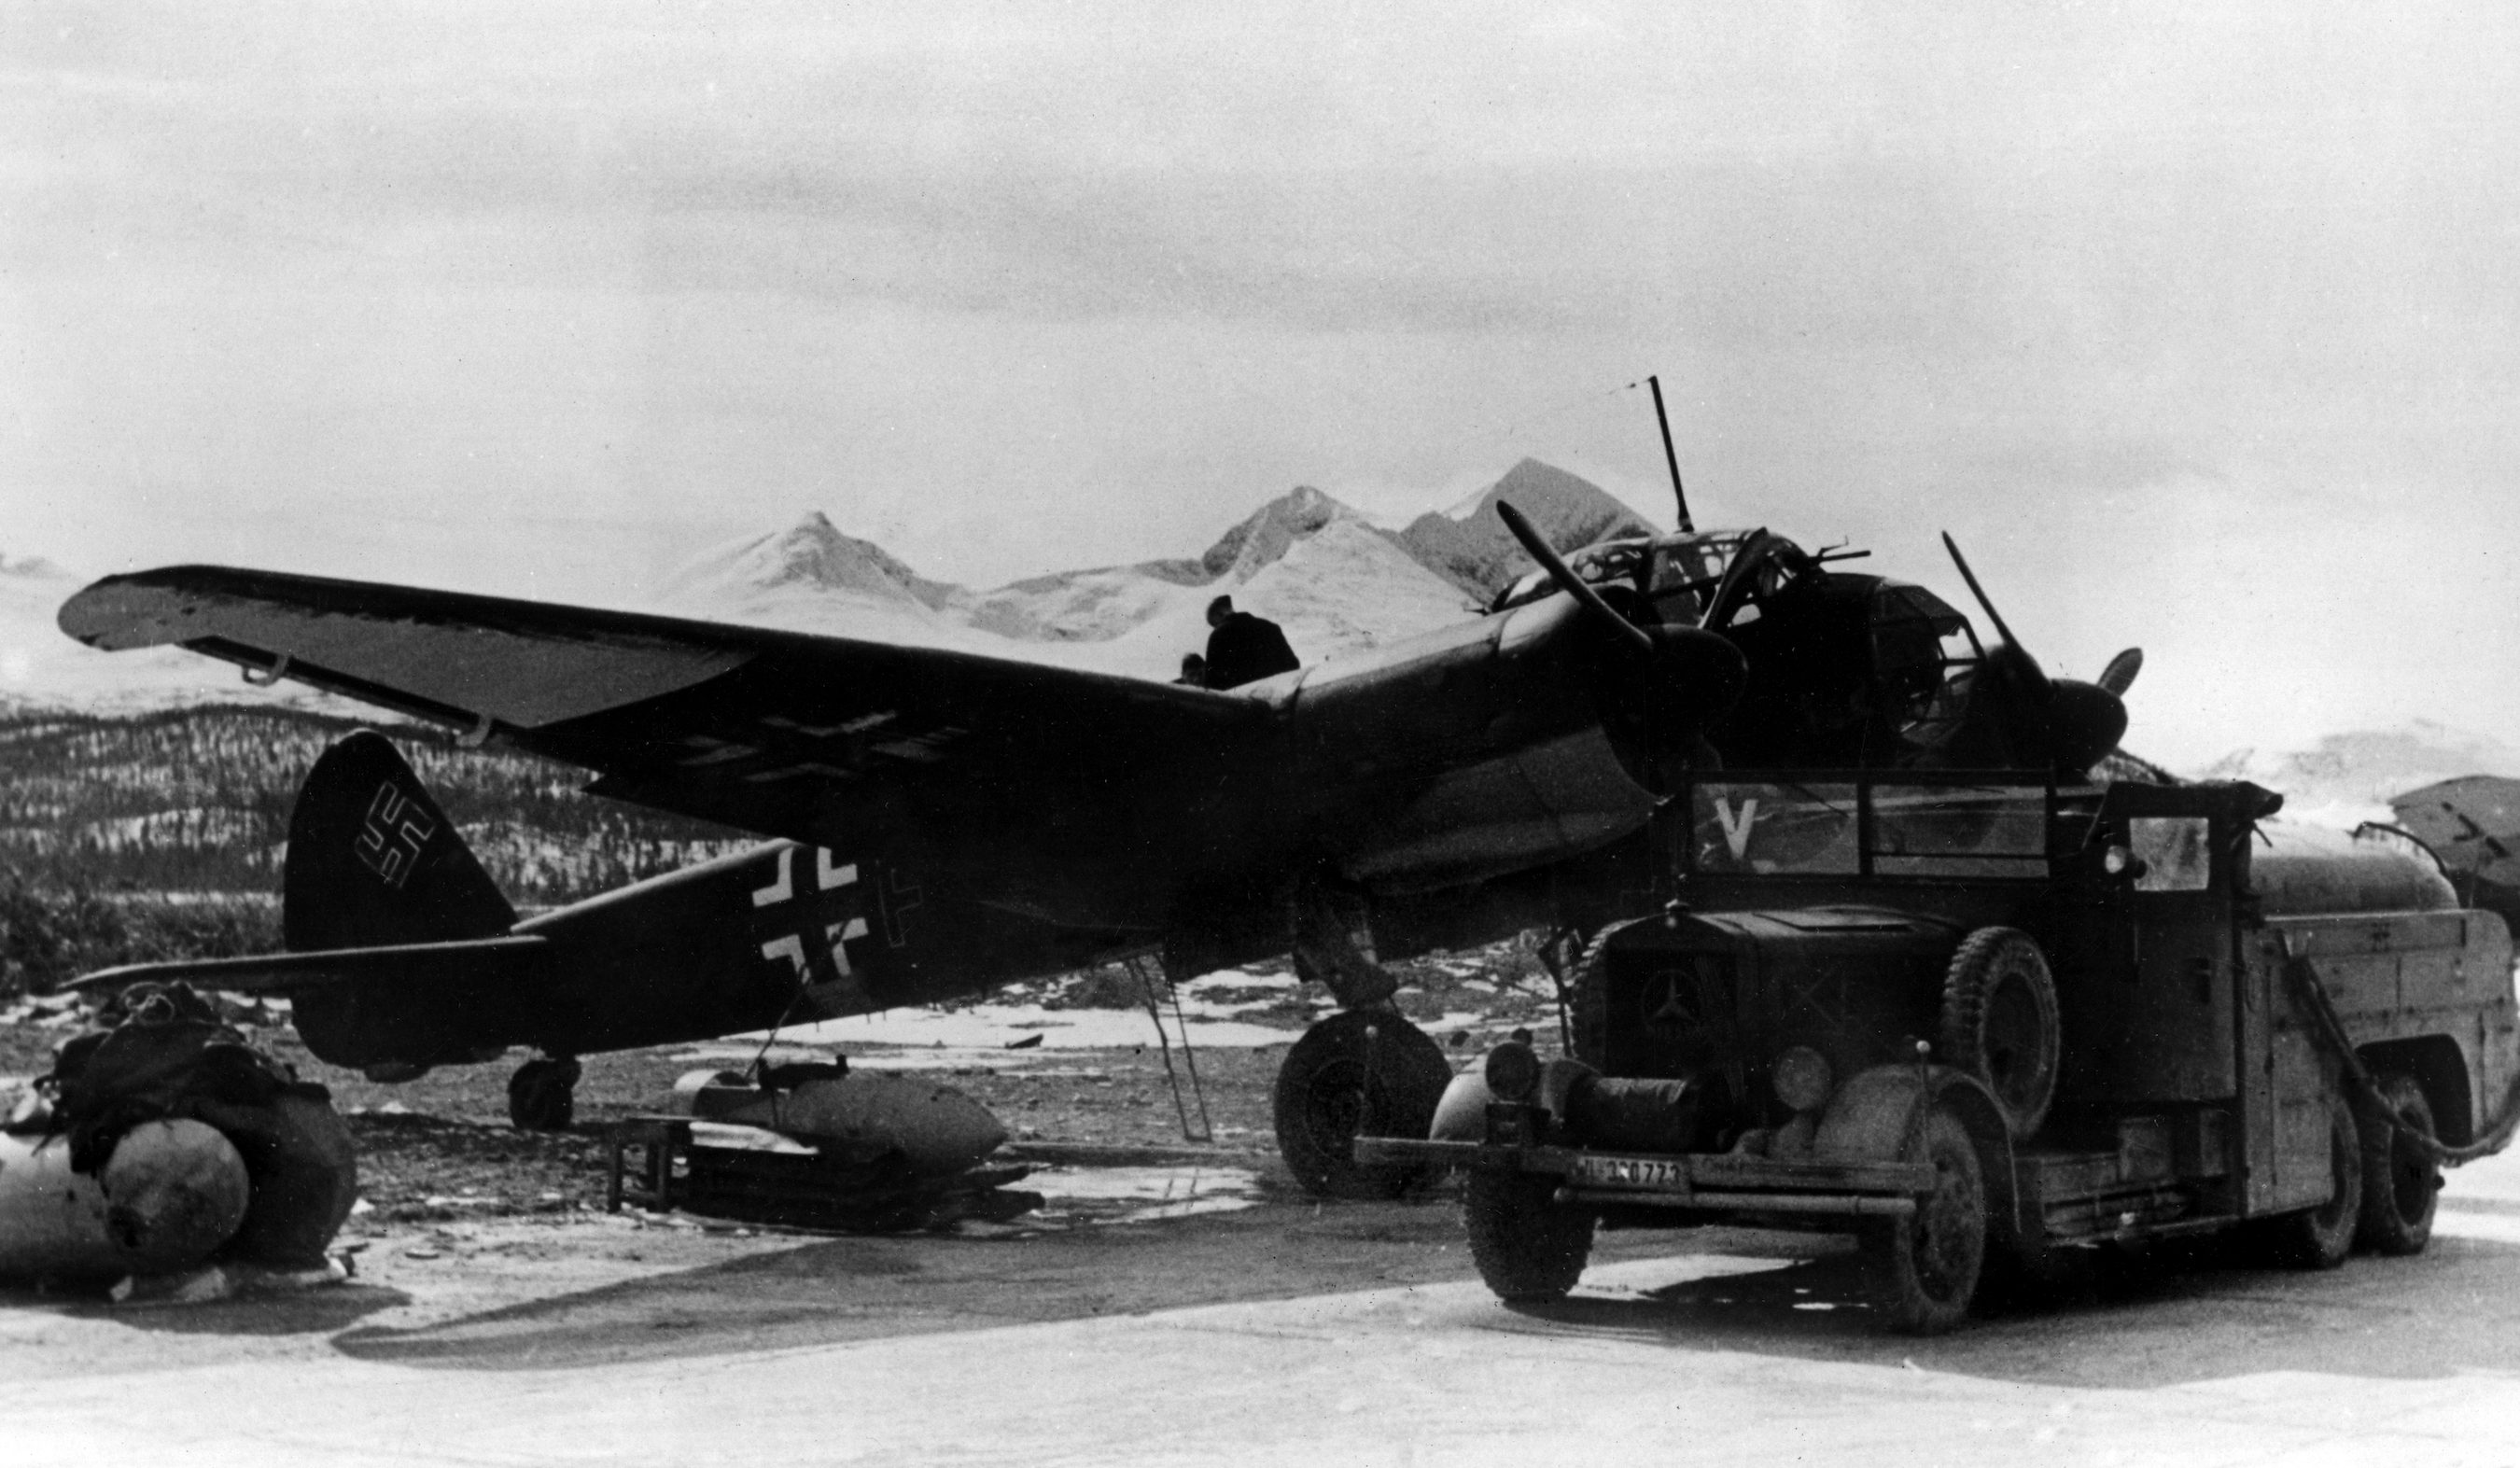 Aircraft bound for Arkhangelsk to attack the Allied are refuelled in an Axis airbase. Finland, July 1942 (Photo by Mondadori Portfolio via Getty Images)